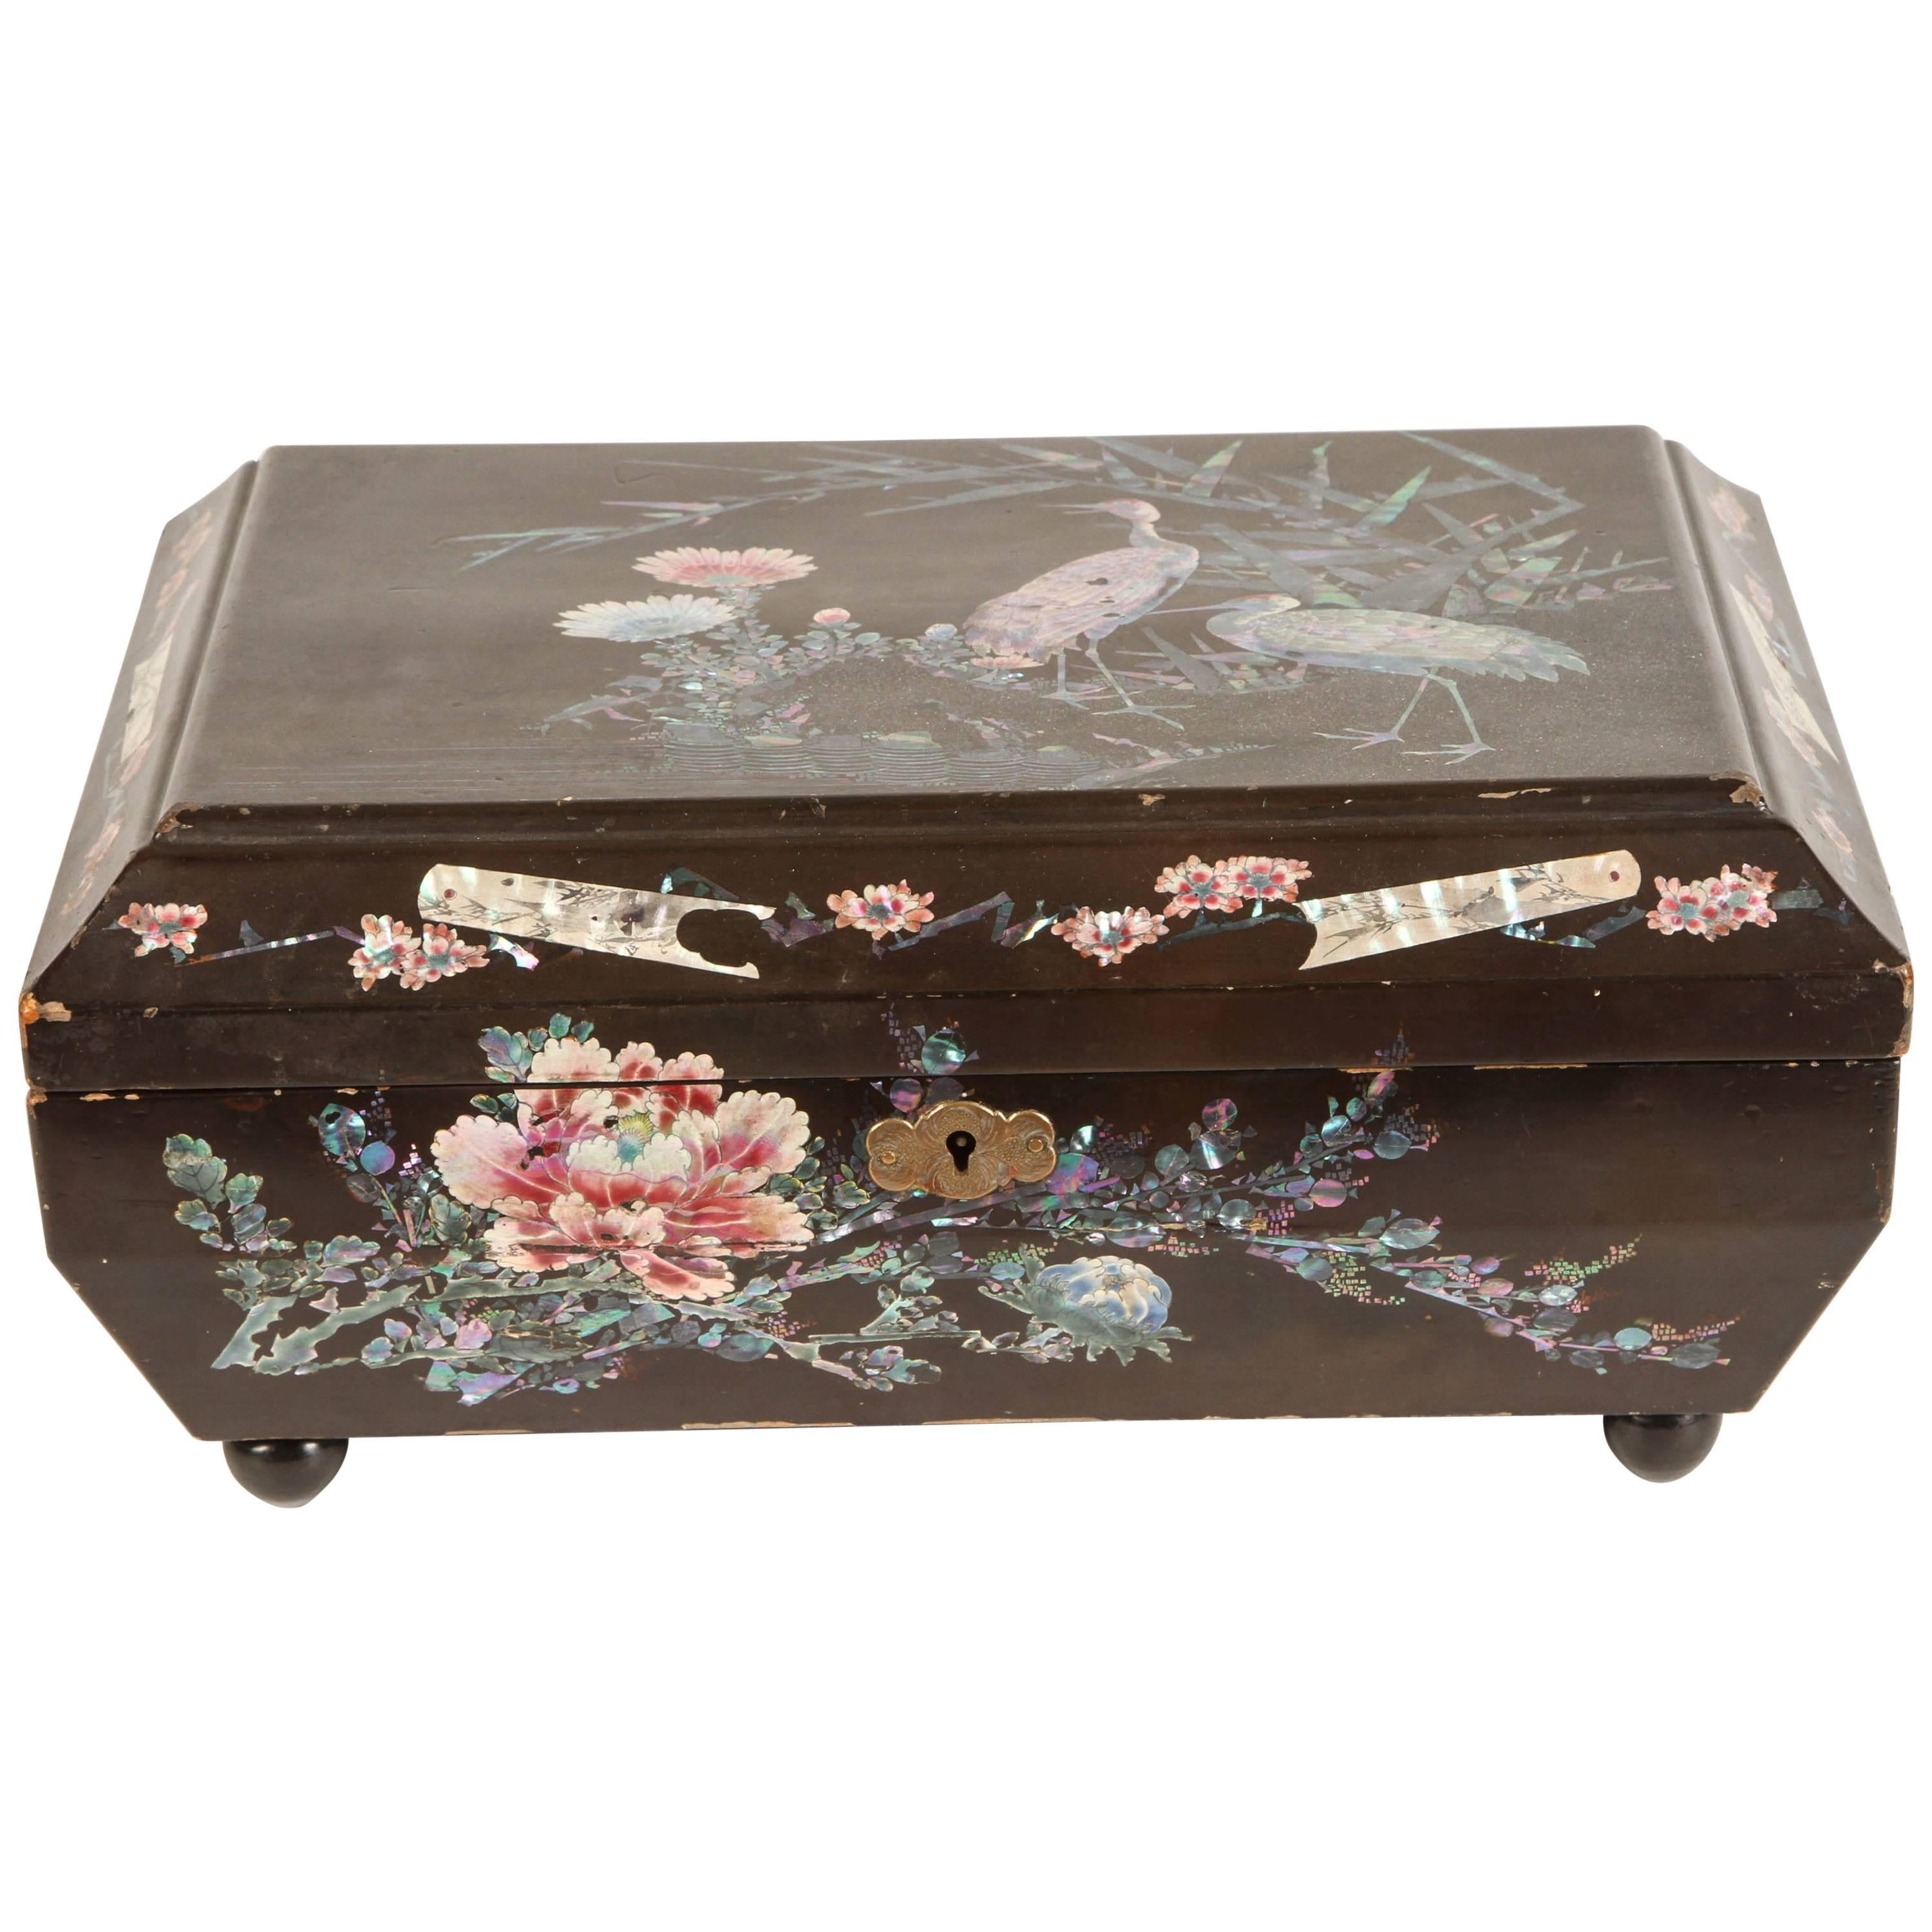 Japanese Lacquer Box with Mother-of-Pearl Inlay